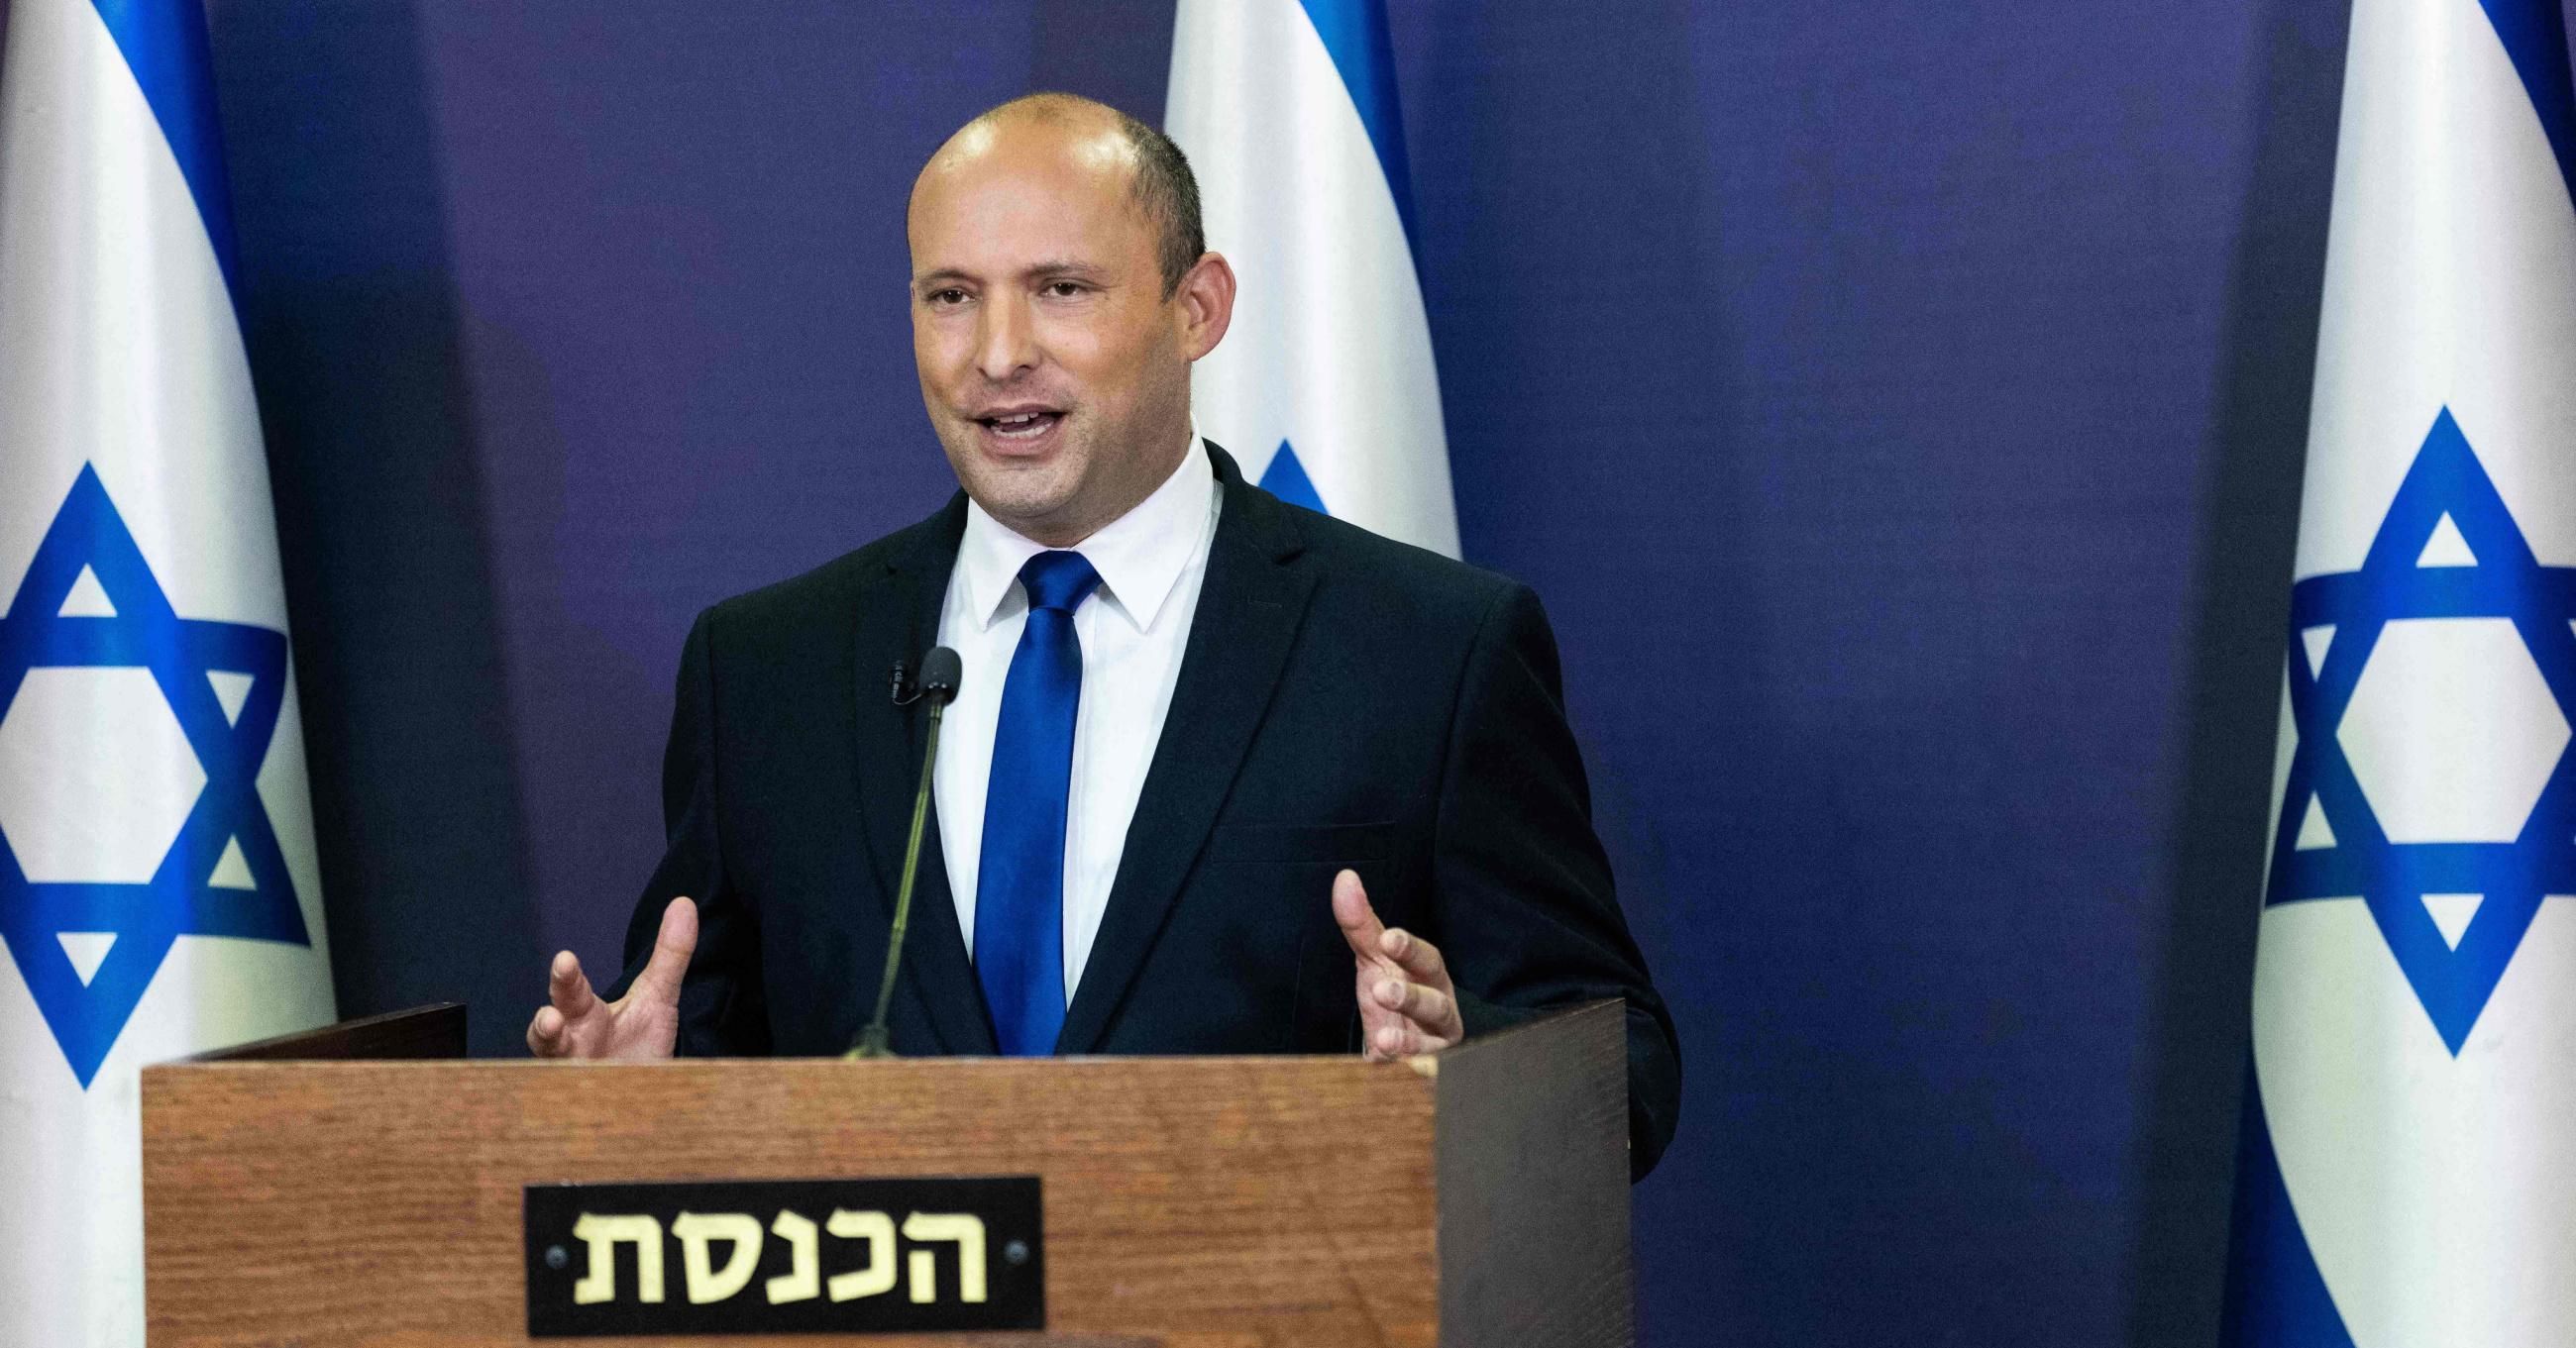 Leader of the Israeli Yemina party, Naftali Bennett, delivers a political statement at the Knesset